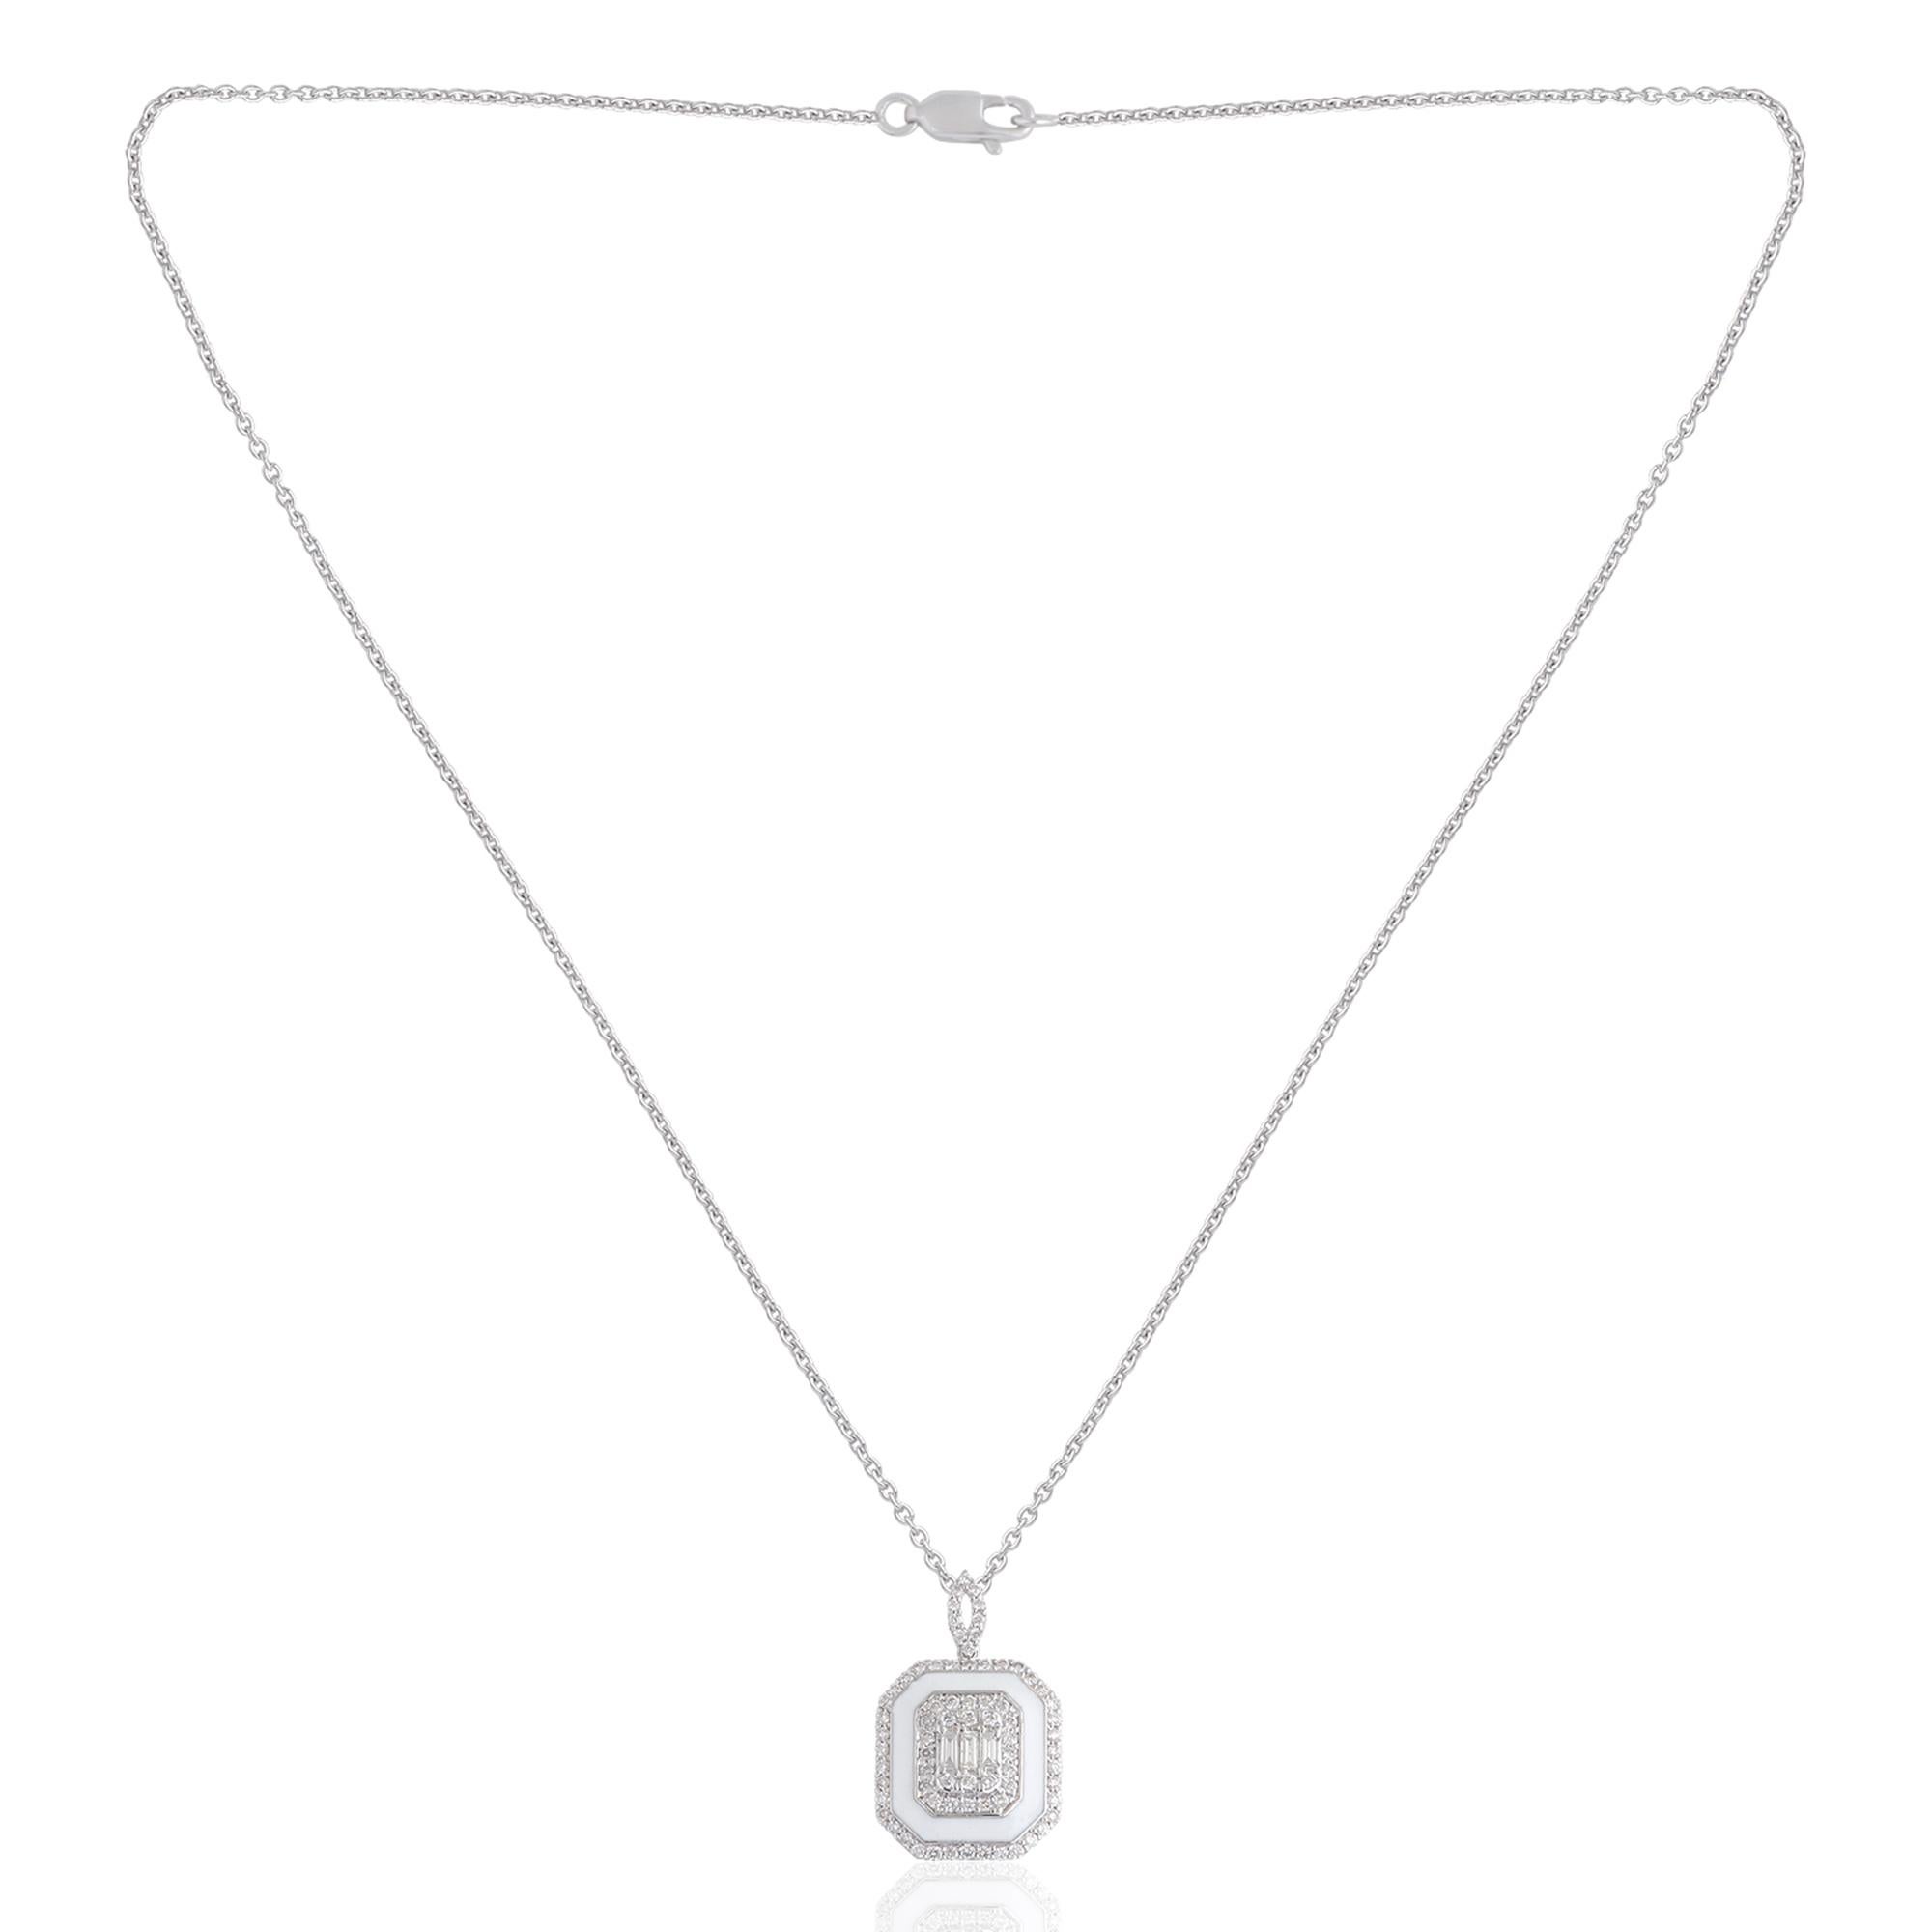 The 0.55 Carat Diamond Pave Charm White Enamel Pendant Necklace in 14 Karat White Gold is more than just a piece of jewelry; it is a symbol of sophistication, grace, and refined beauty.

Item Code :- CN-40061
Gross Wt. :- 4.68 gm
14k White Gold Wt.